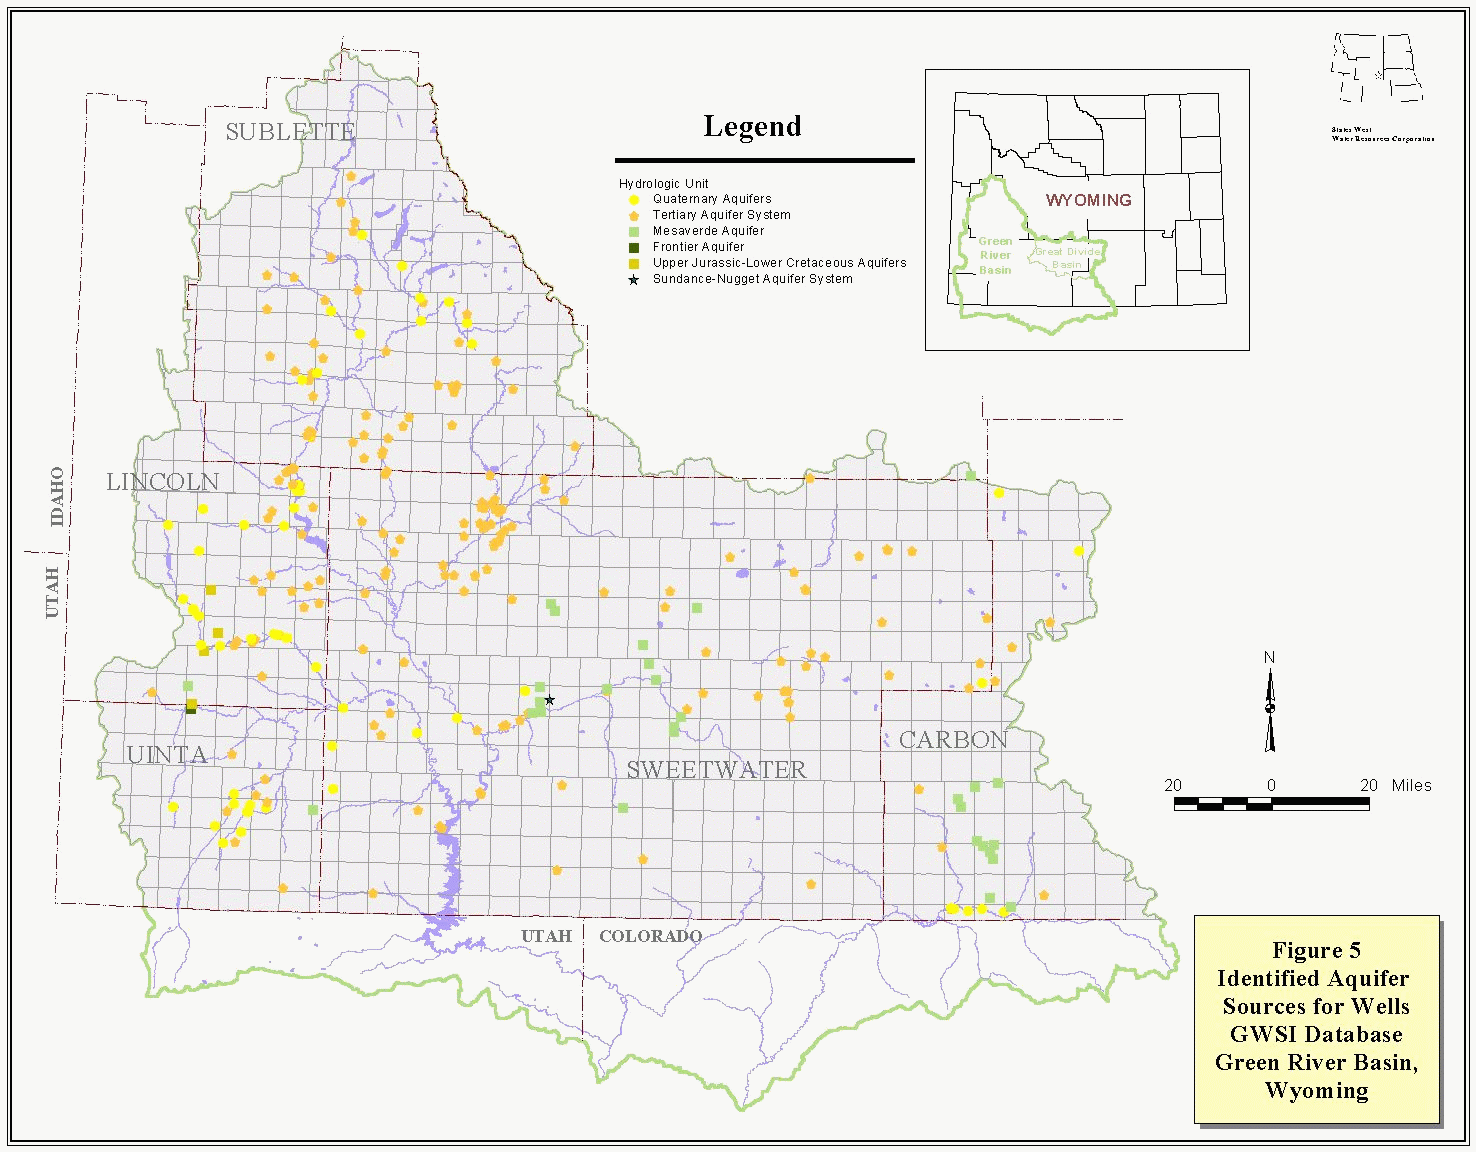 Identified Aquifer Sources for Wells, GWSI Database,
Green River Basin, Wyoming